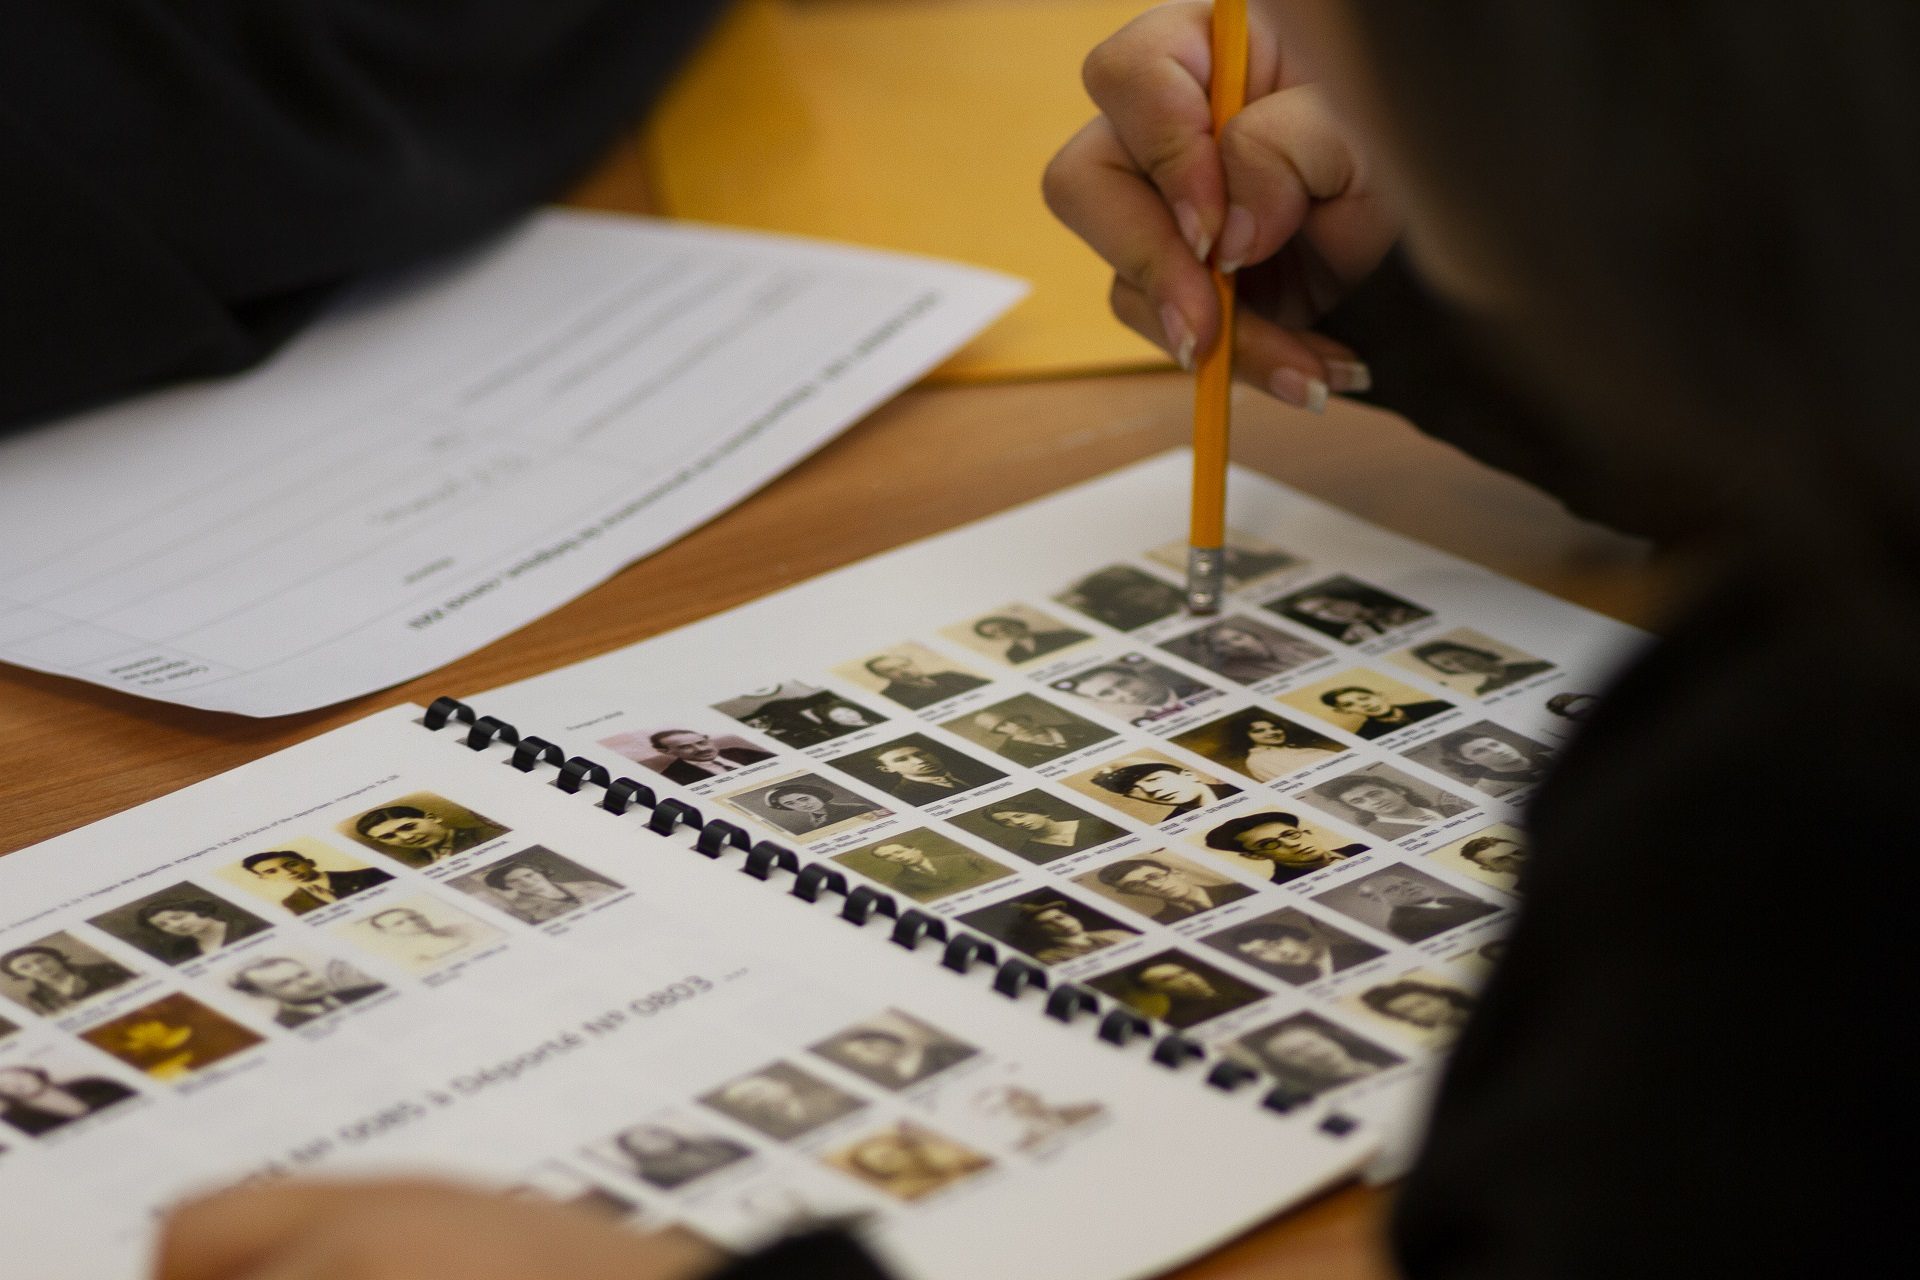 Students learn about the history of the Holocaust through artifacts and analysis sheets from primary sources.